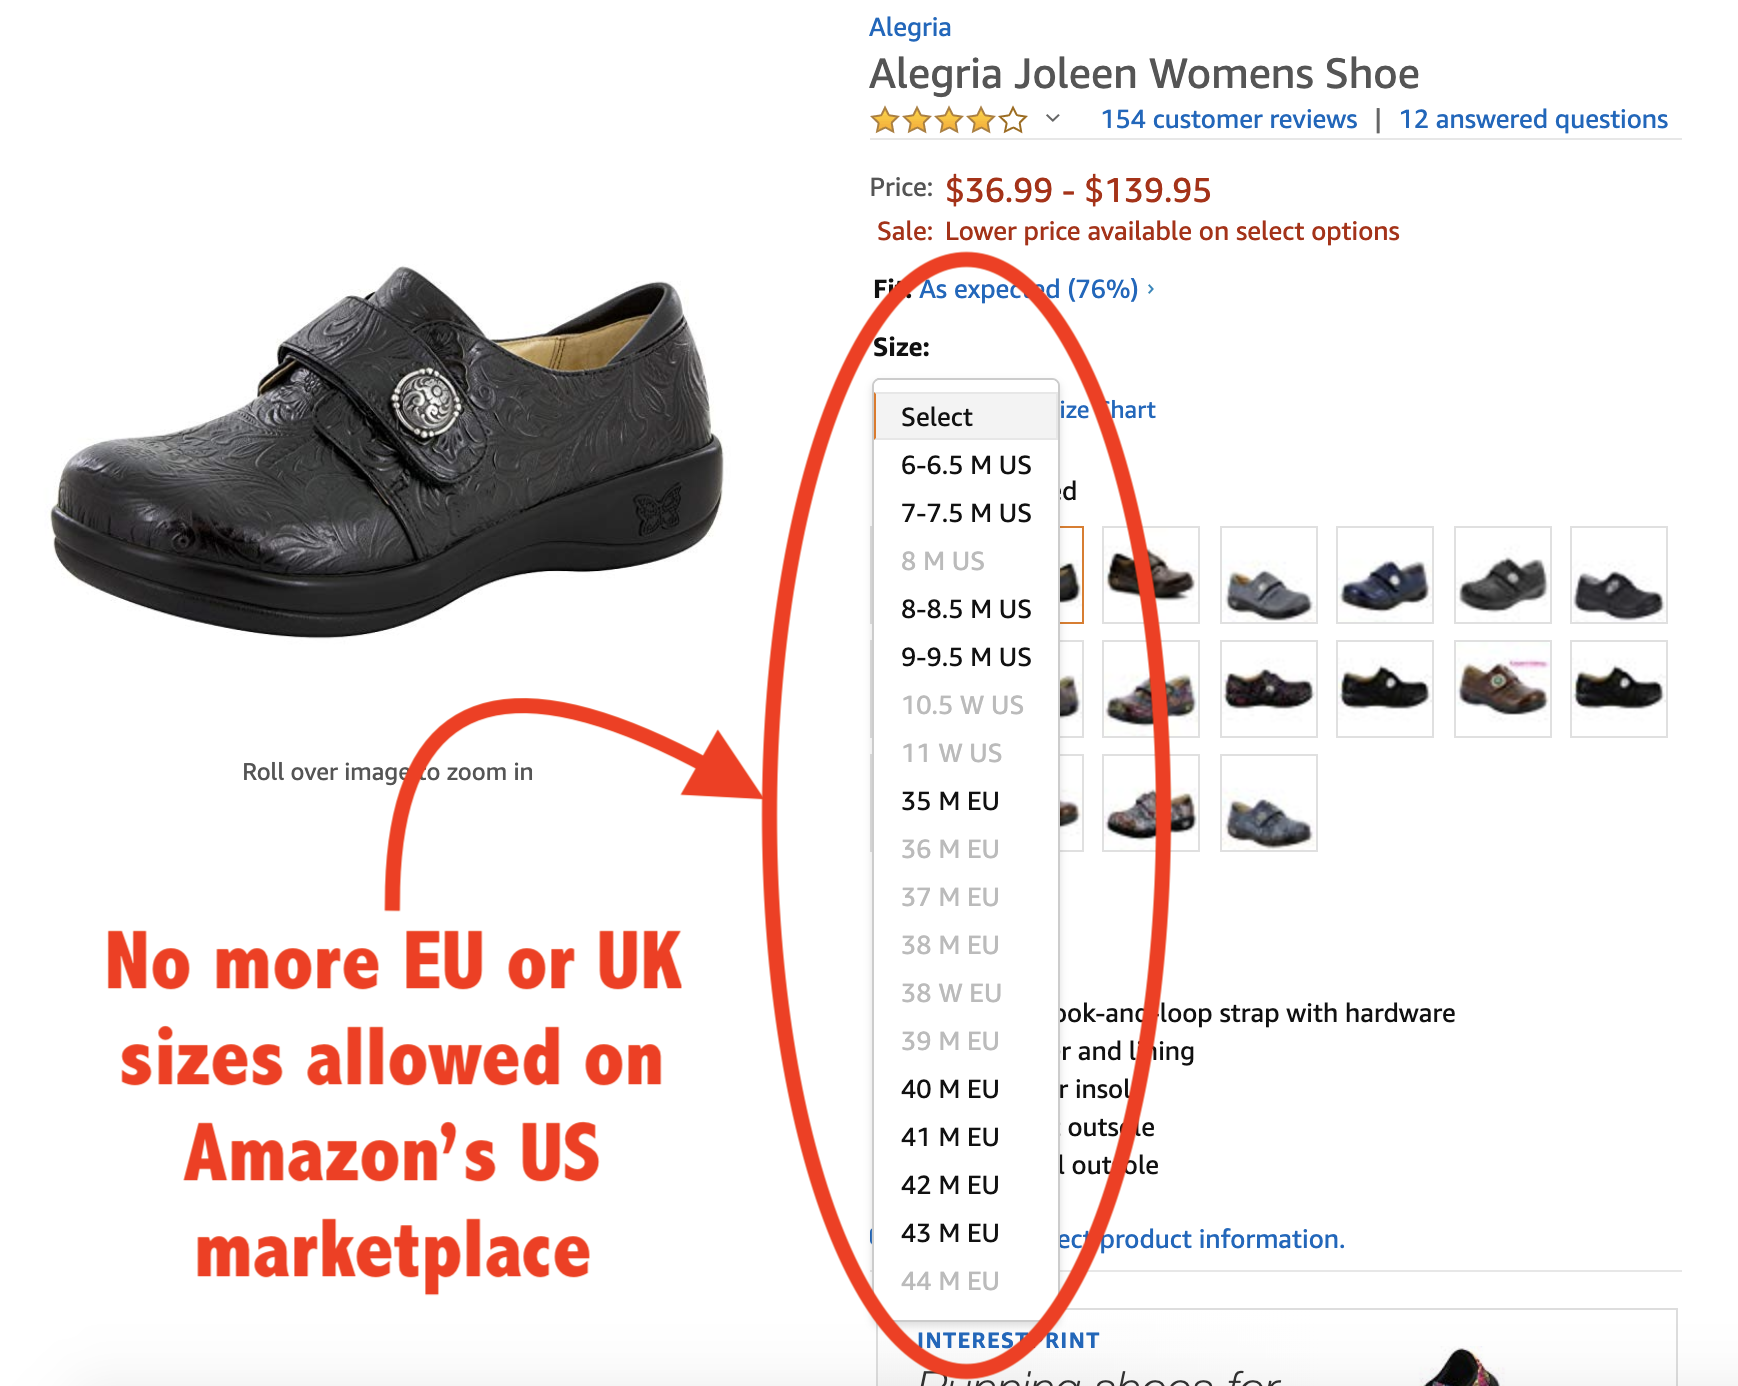 Amazon Shoe Size Requirements for 